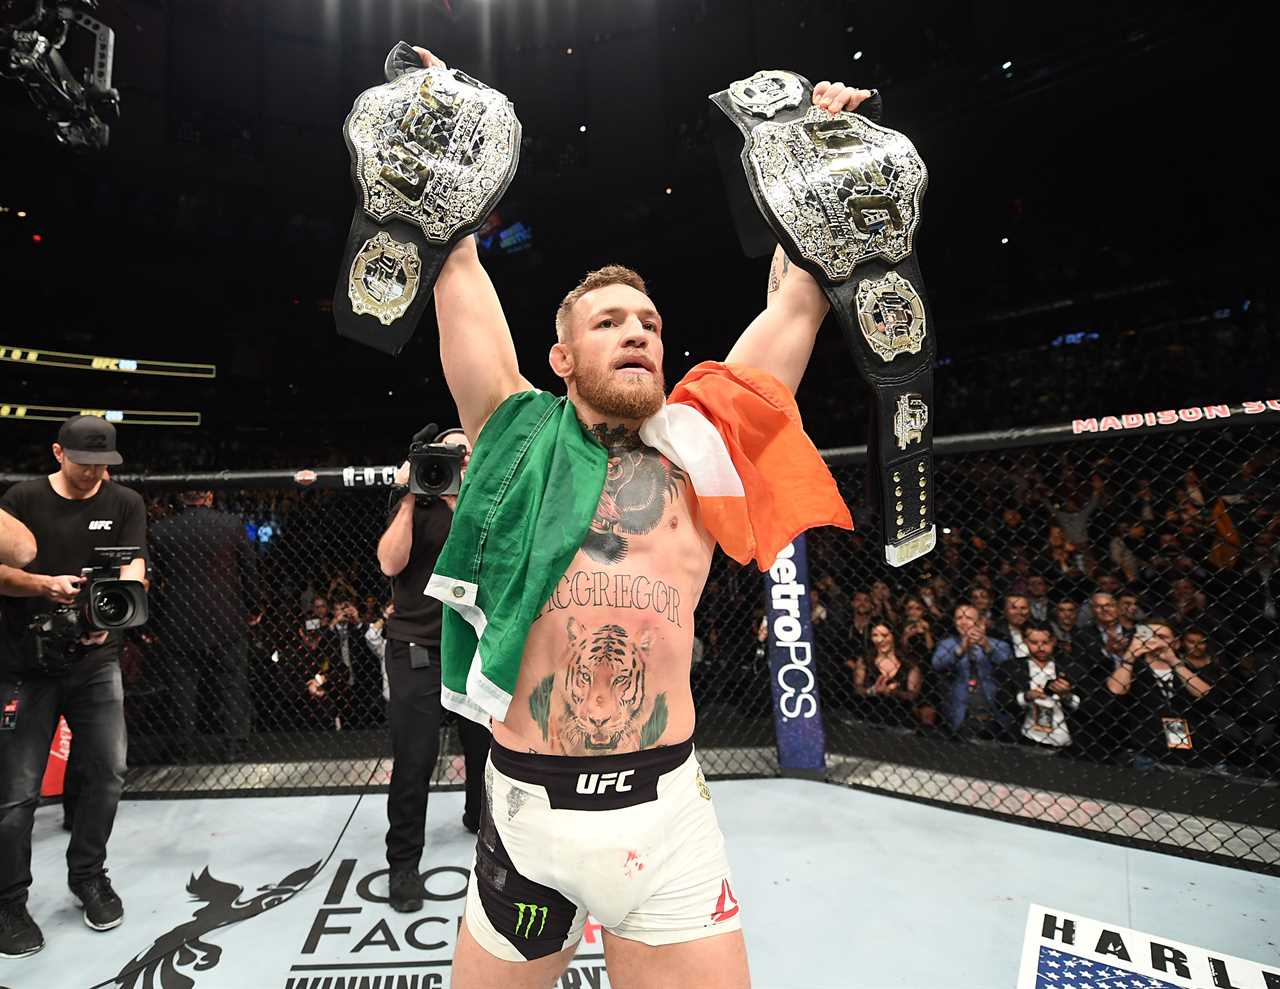 Conor McGregor takes aim at Khabib for his UFC Hall of Fame entry. He explains seven reasons why he is a shoe-in